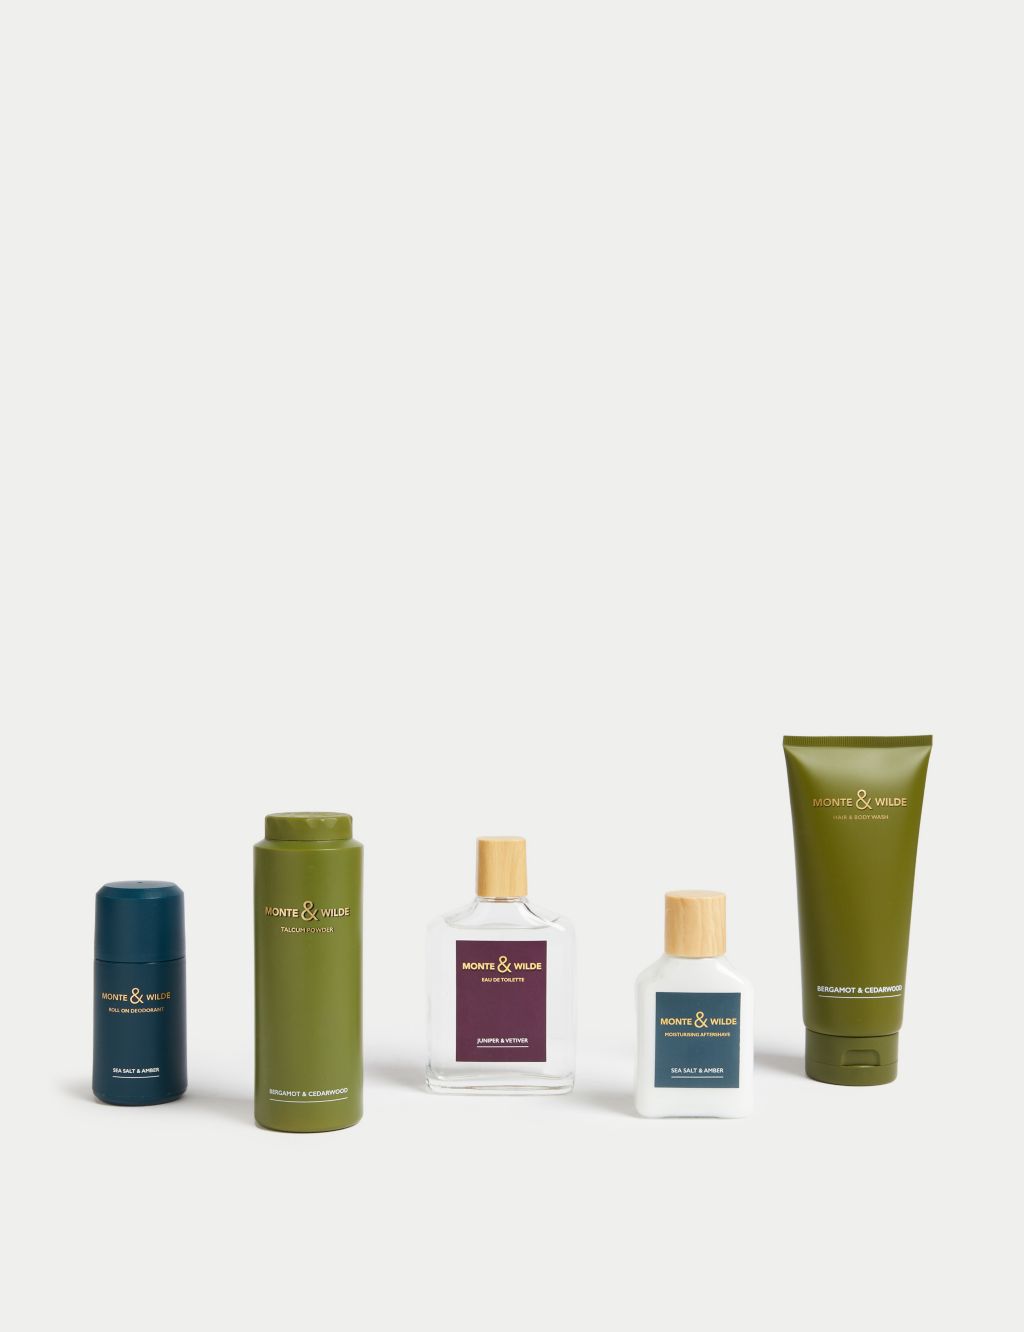 Men's Grooming Gift Collection 1 of 4